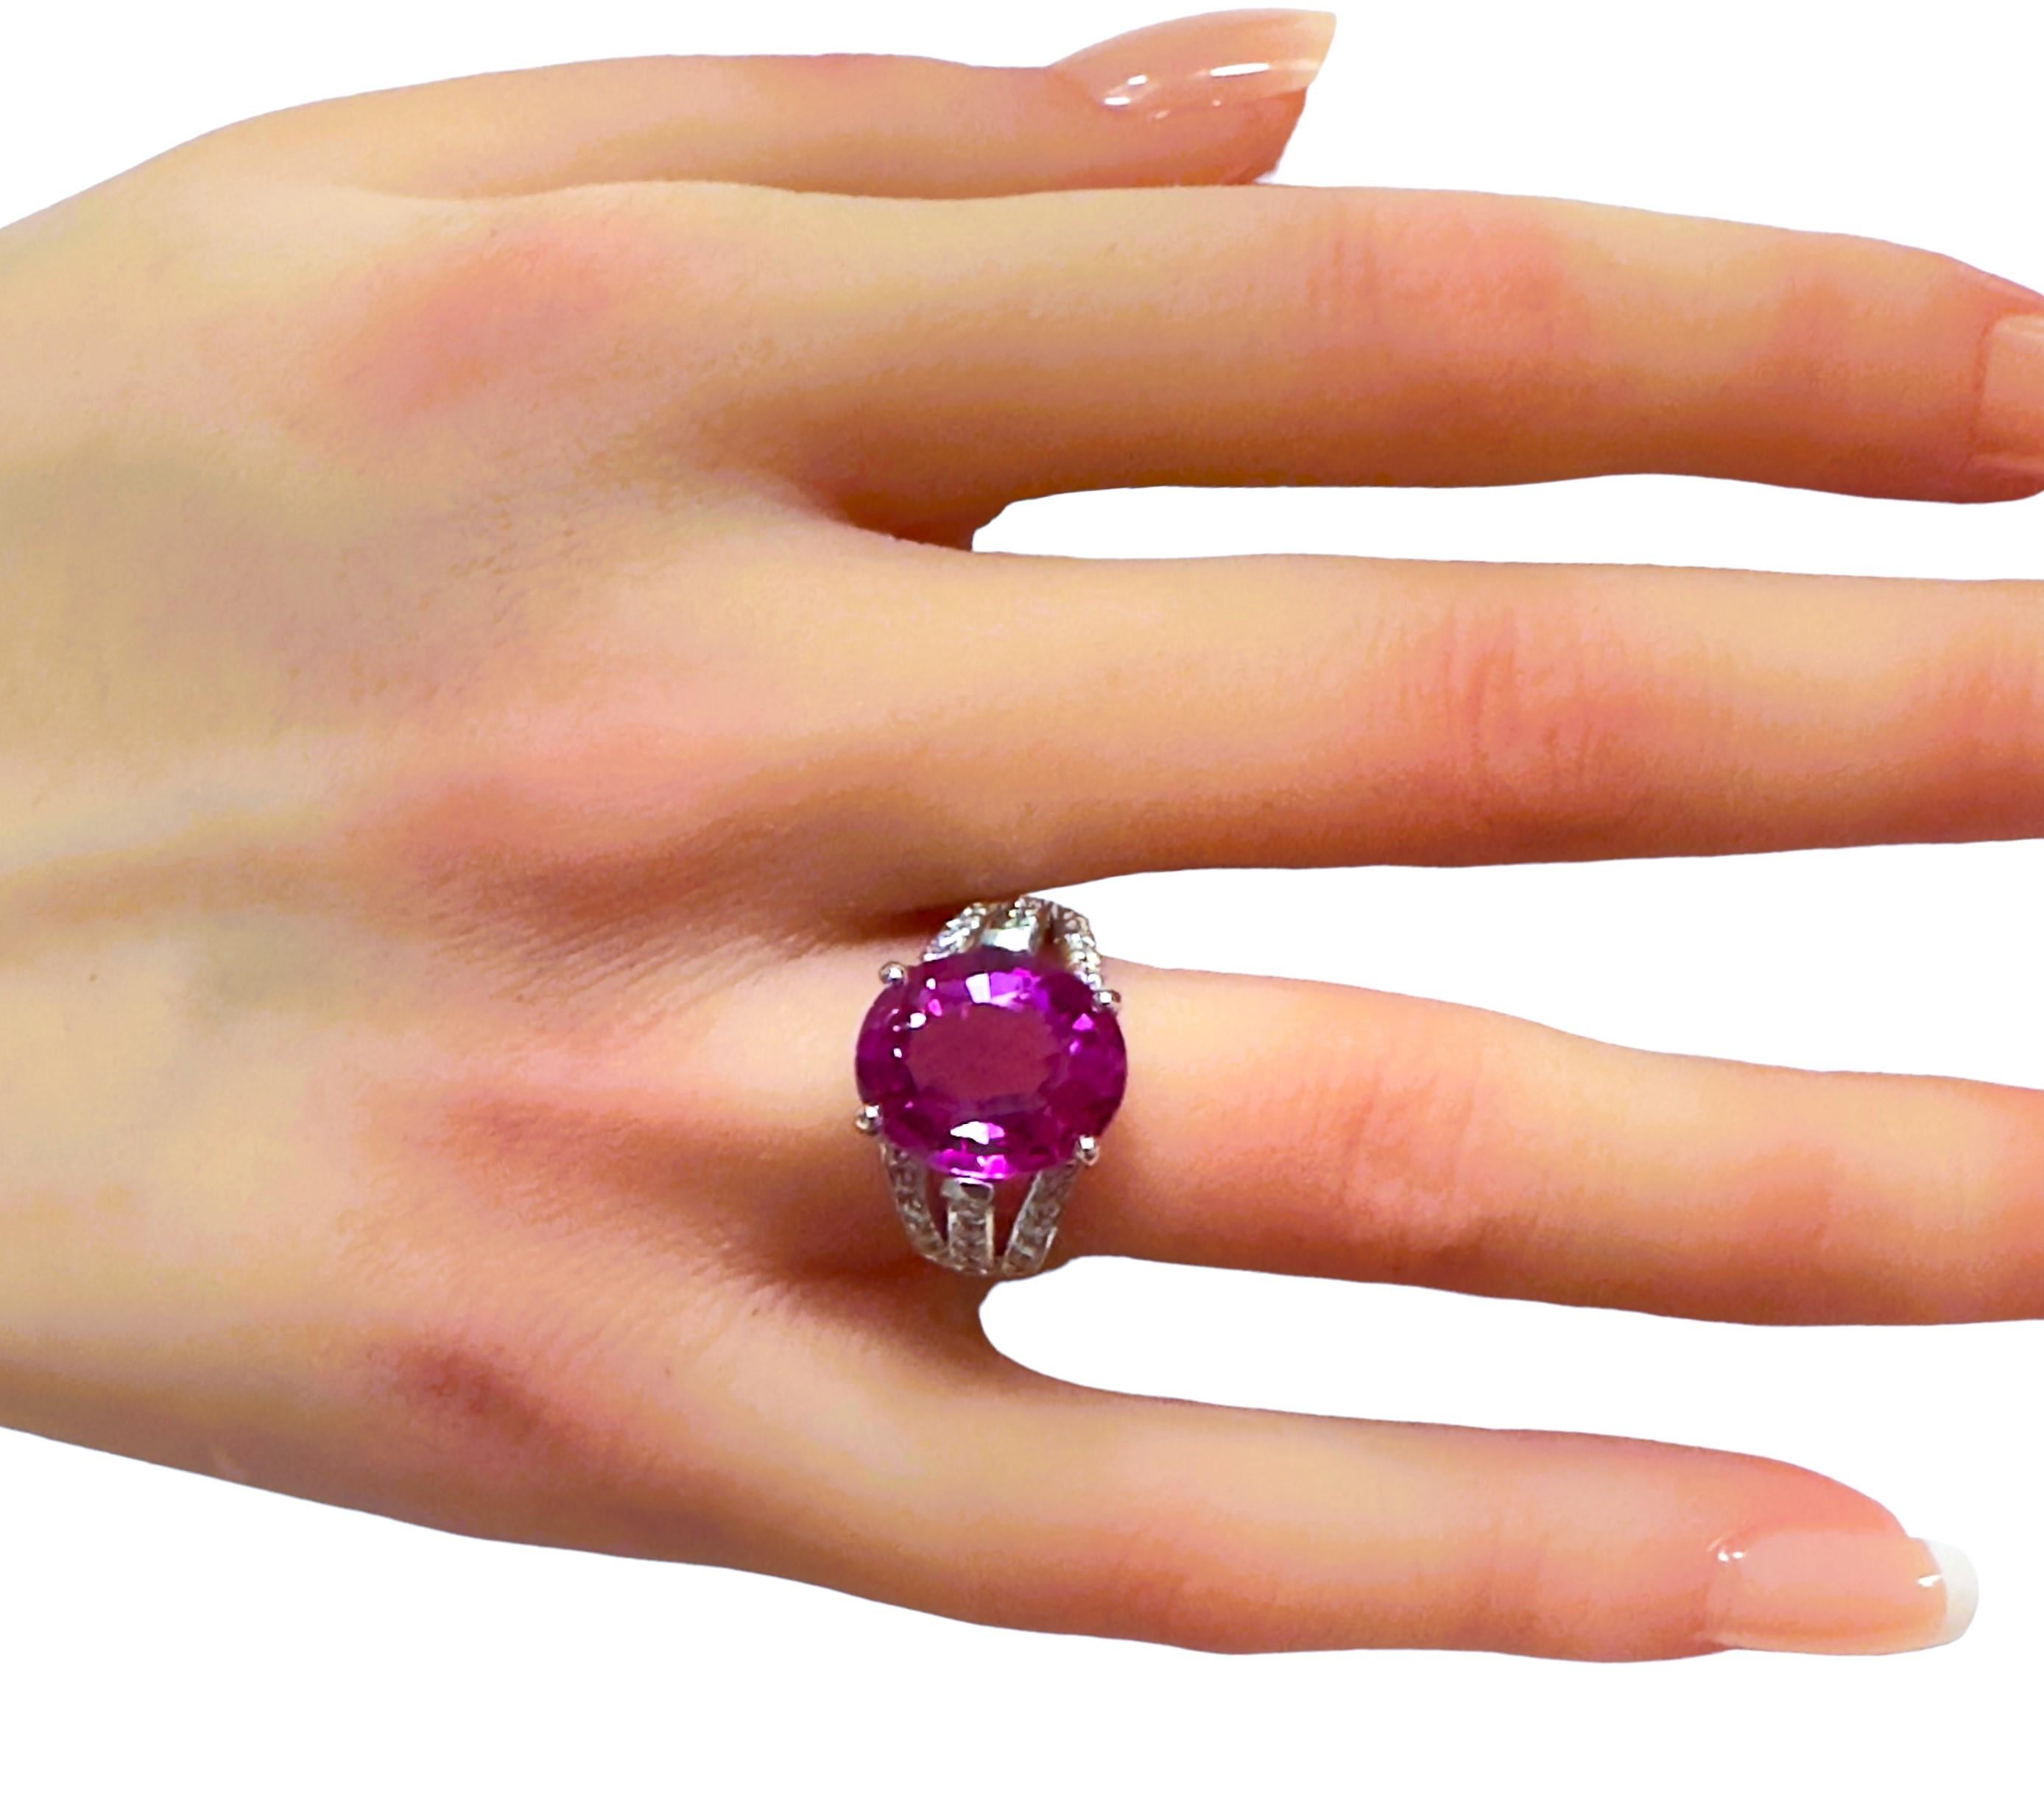 New African 8.0 Ct Pink Sapphire Sterling Ring Size 6 2